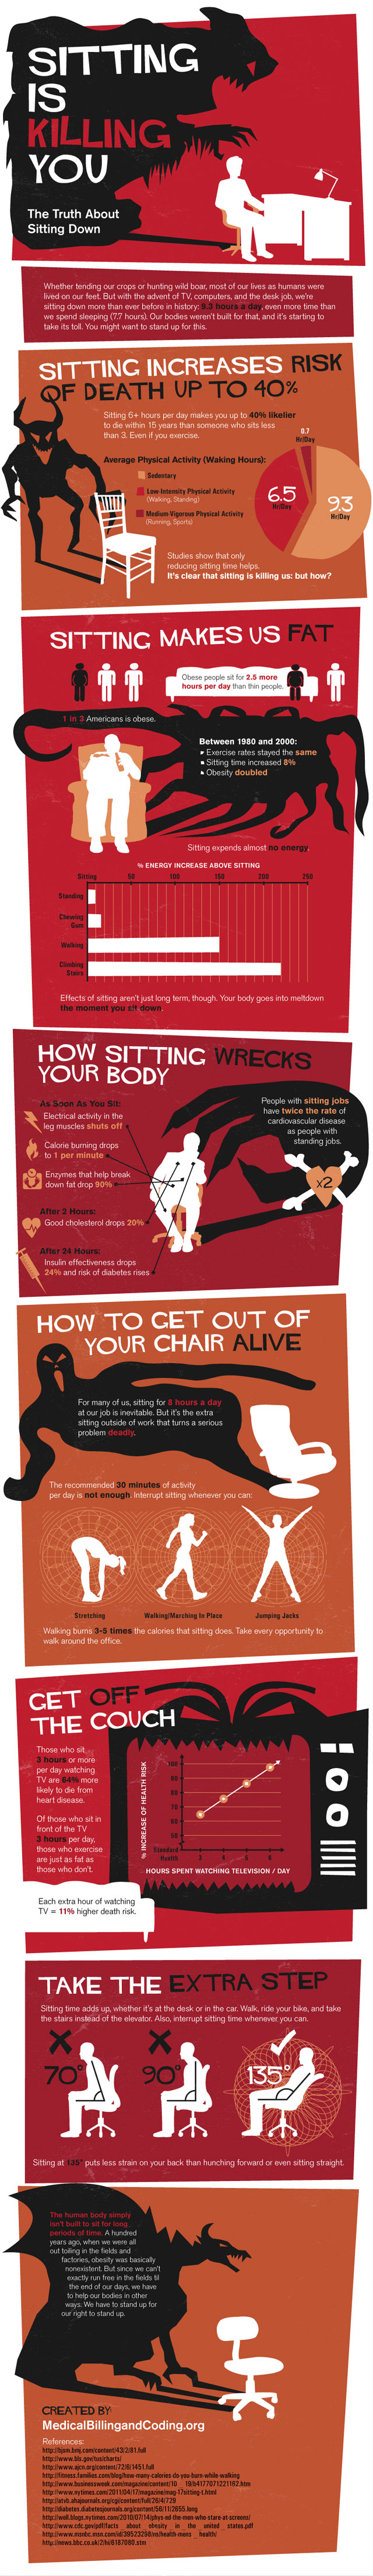 sitting-down-infographic